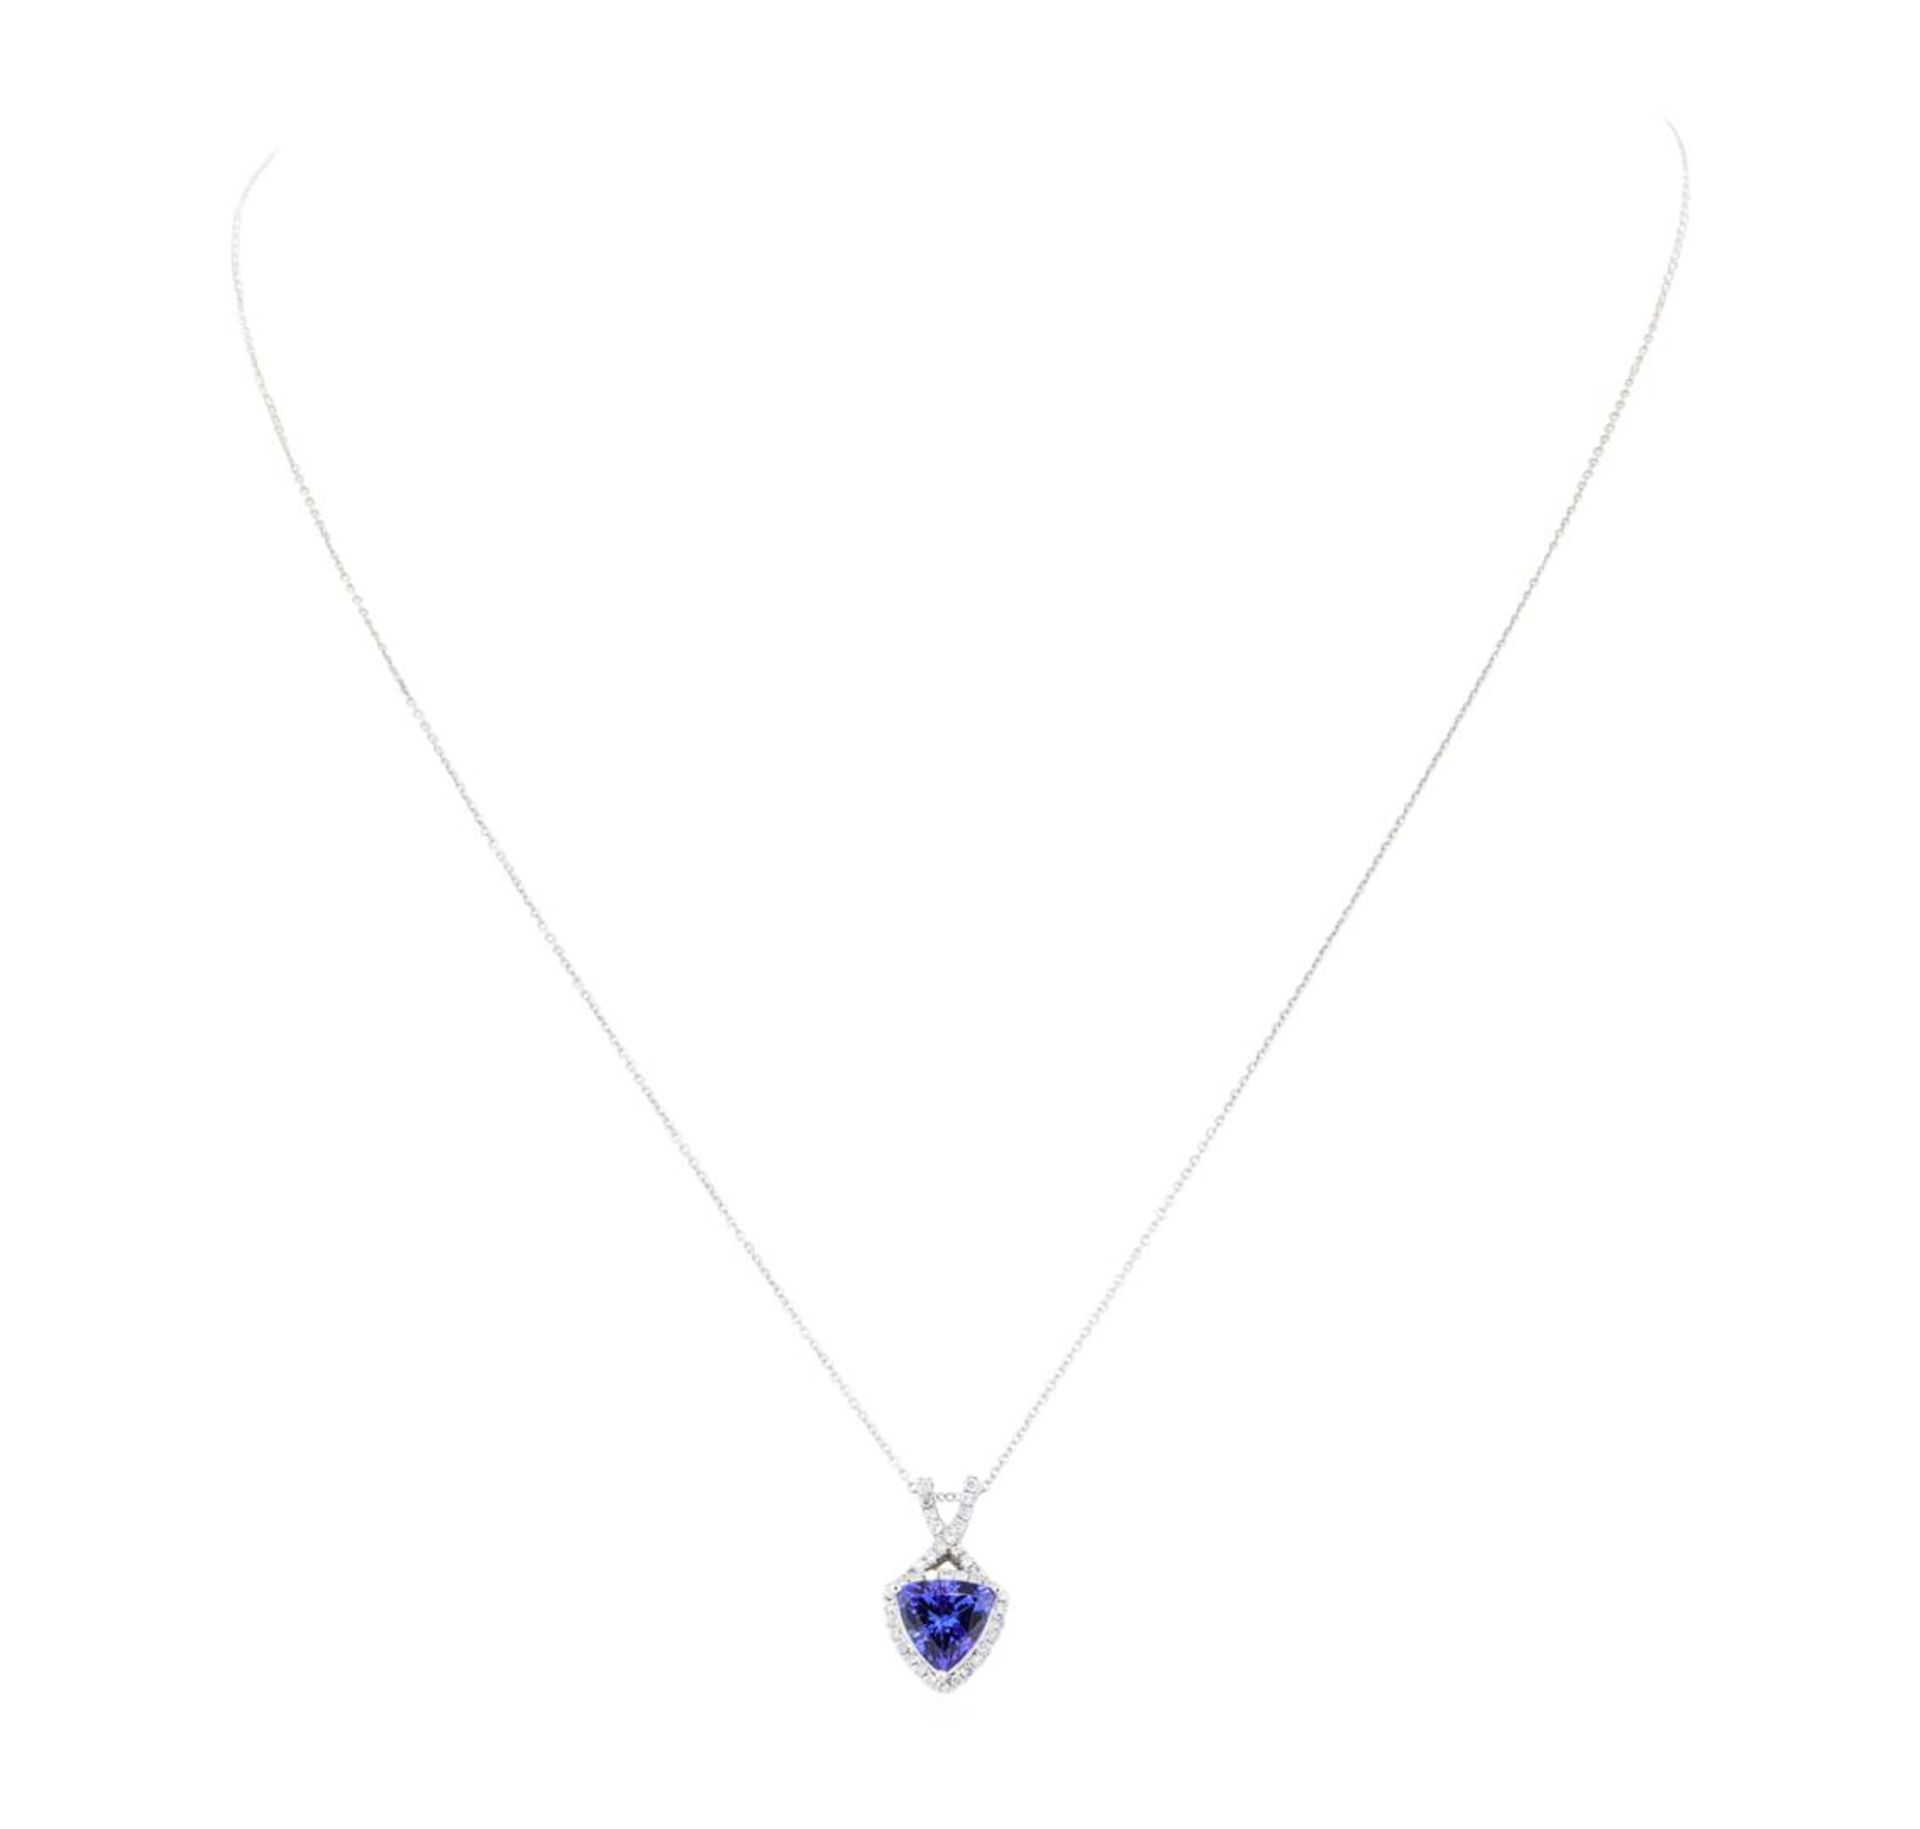 1.48ctw Tanzanite and Diamond Pendant With Chain - 14KT White Gold